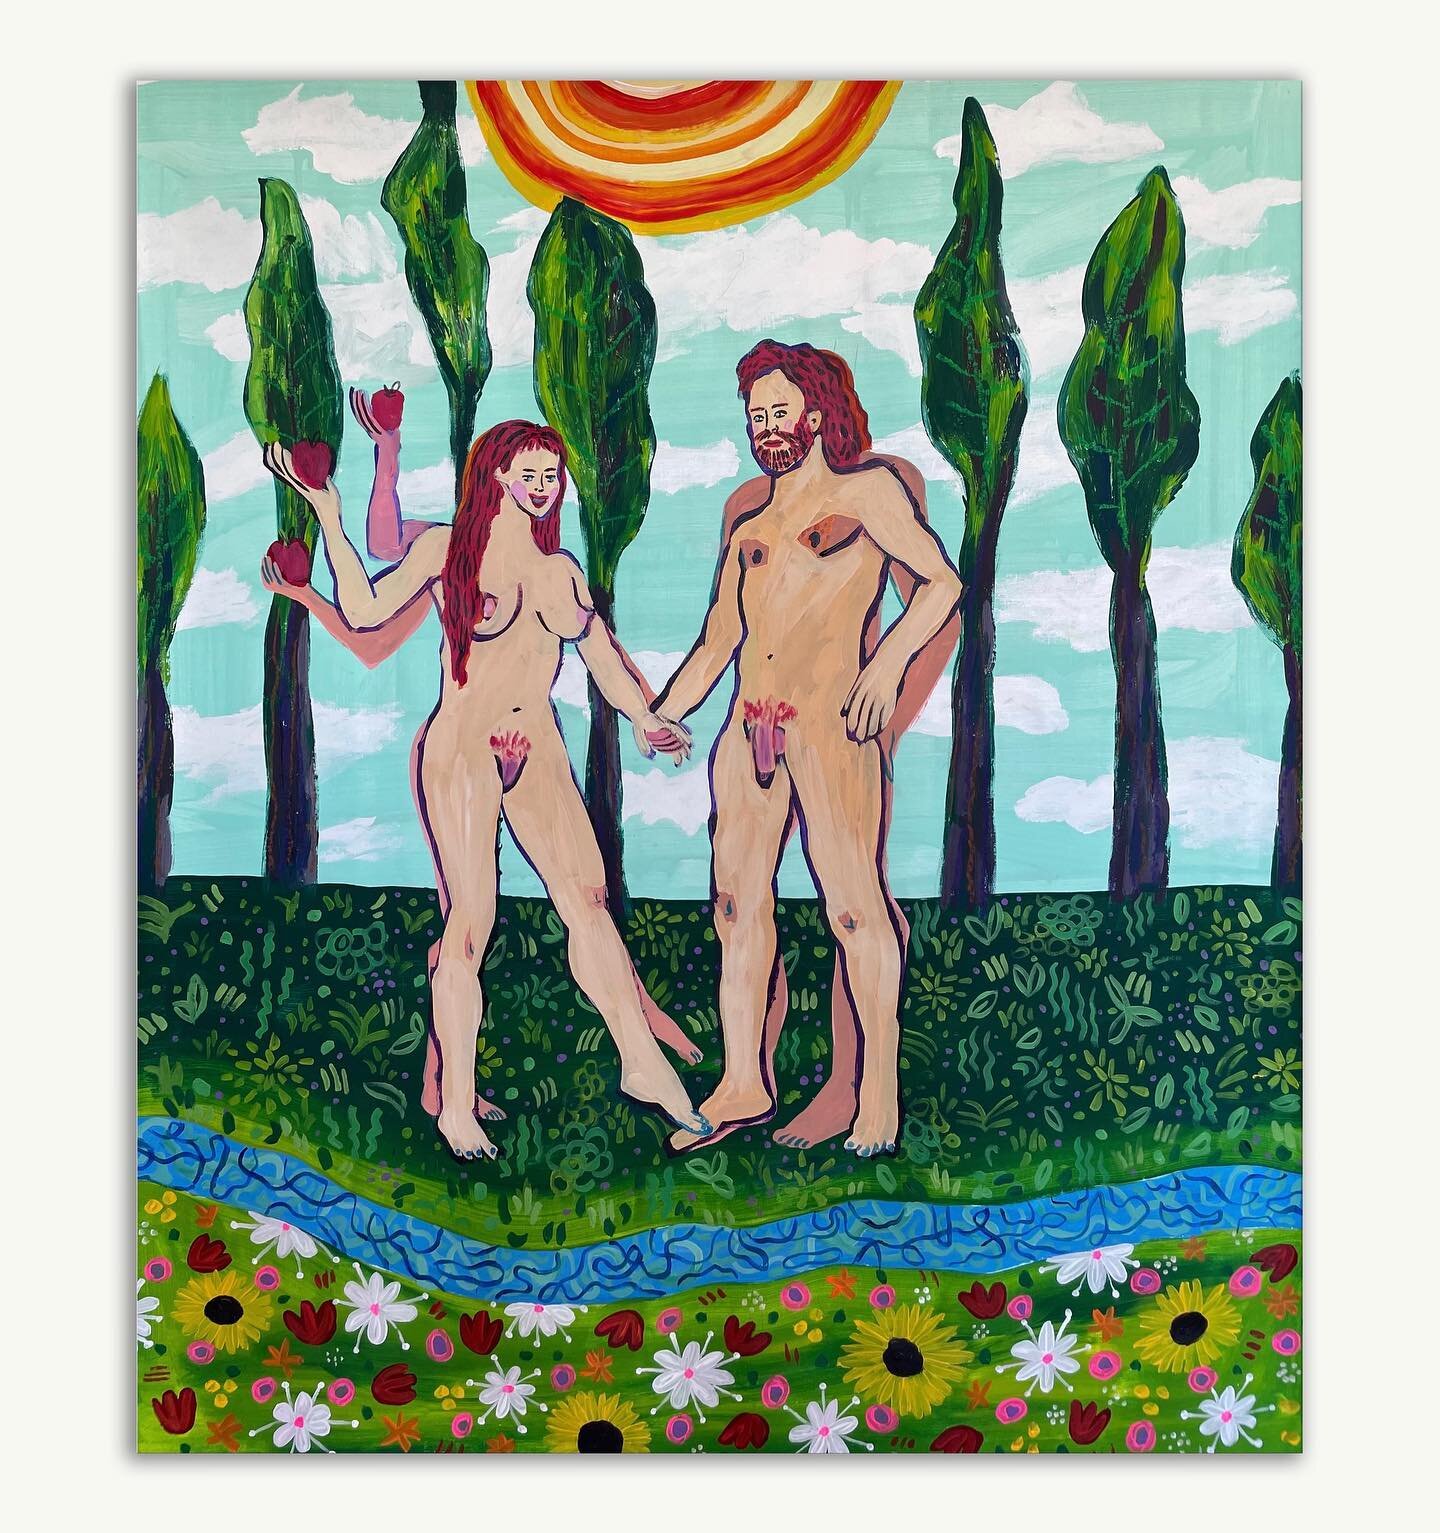 &ldquo;Three-armed Eve &amp; Adam&rdquo; another work from the &ldquo;Heaven on Earth&rdquo; series. 
110x92cm, canvas